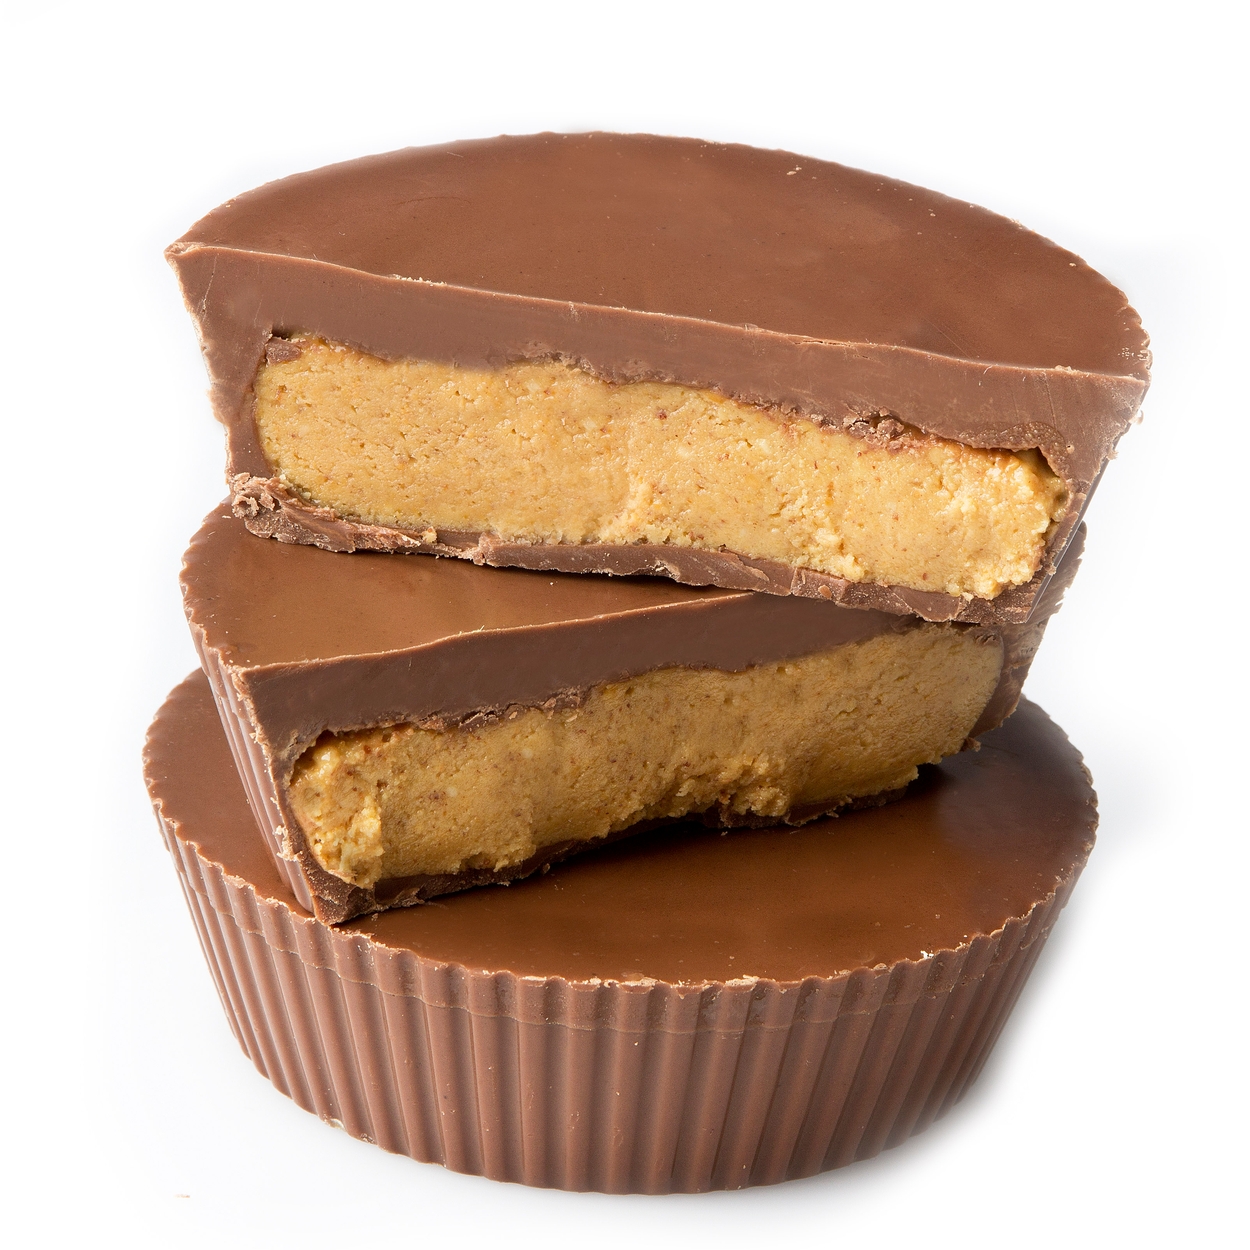 Giant Reese's Peanut Butter Cup - 2 8oz Cups • Chocolate Candy Delights ...